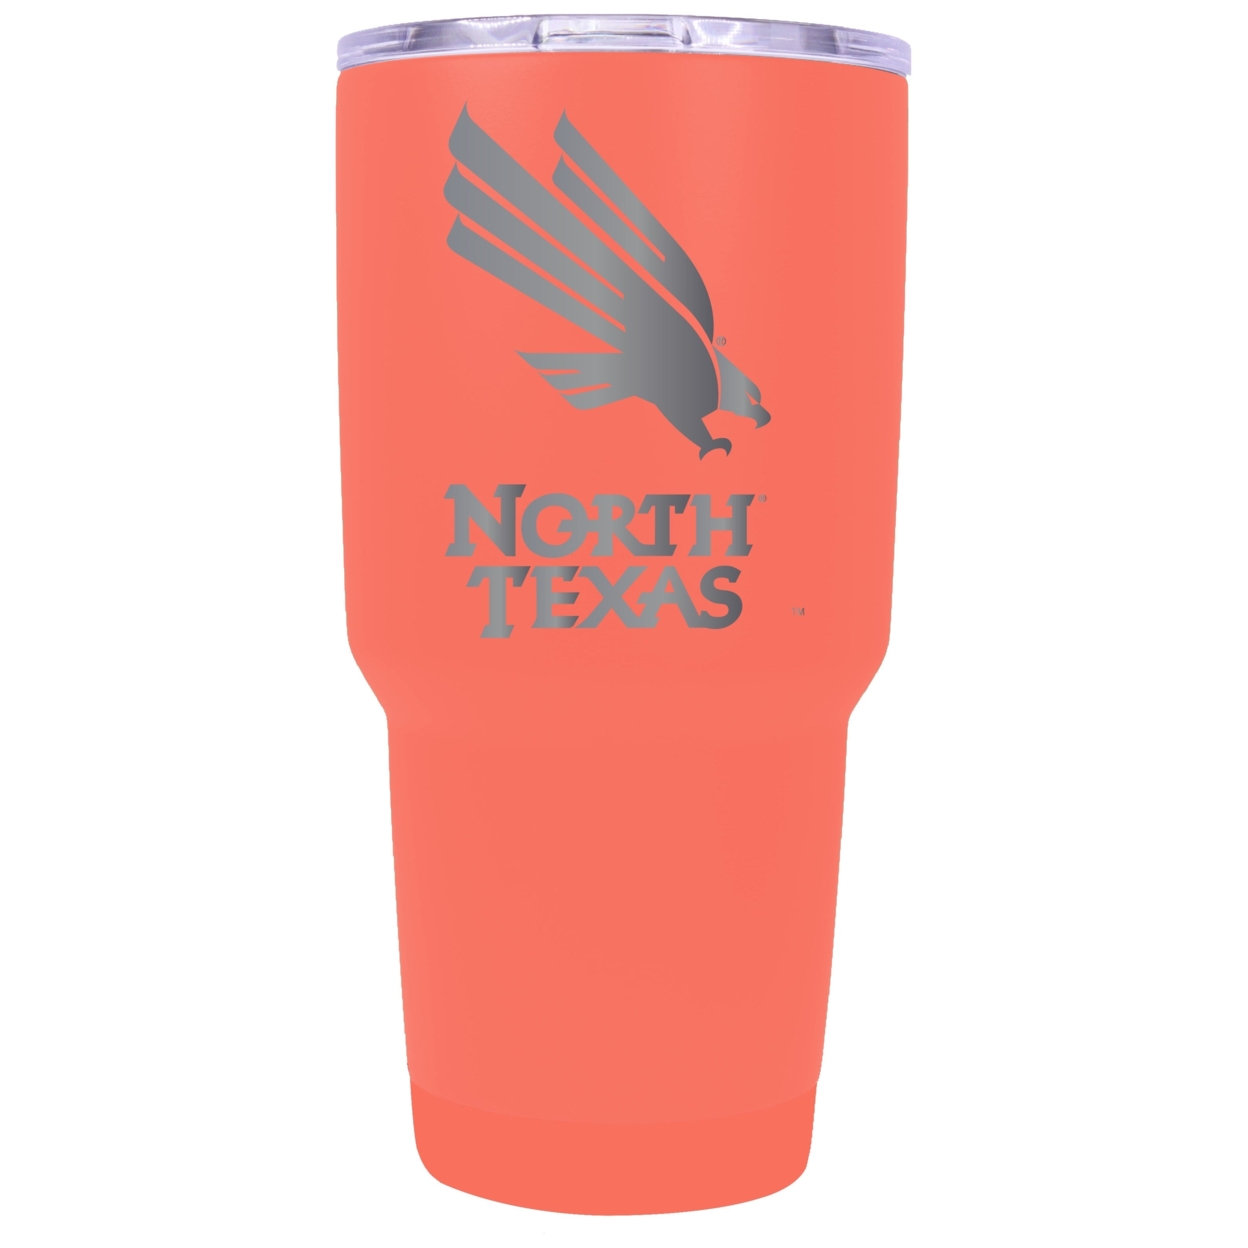 North Texas 24 Oz Laser Engraved Stainless Steel Insulated Tumbler - Choose Your Color. - Coral